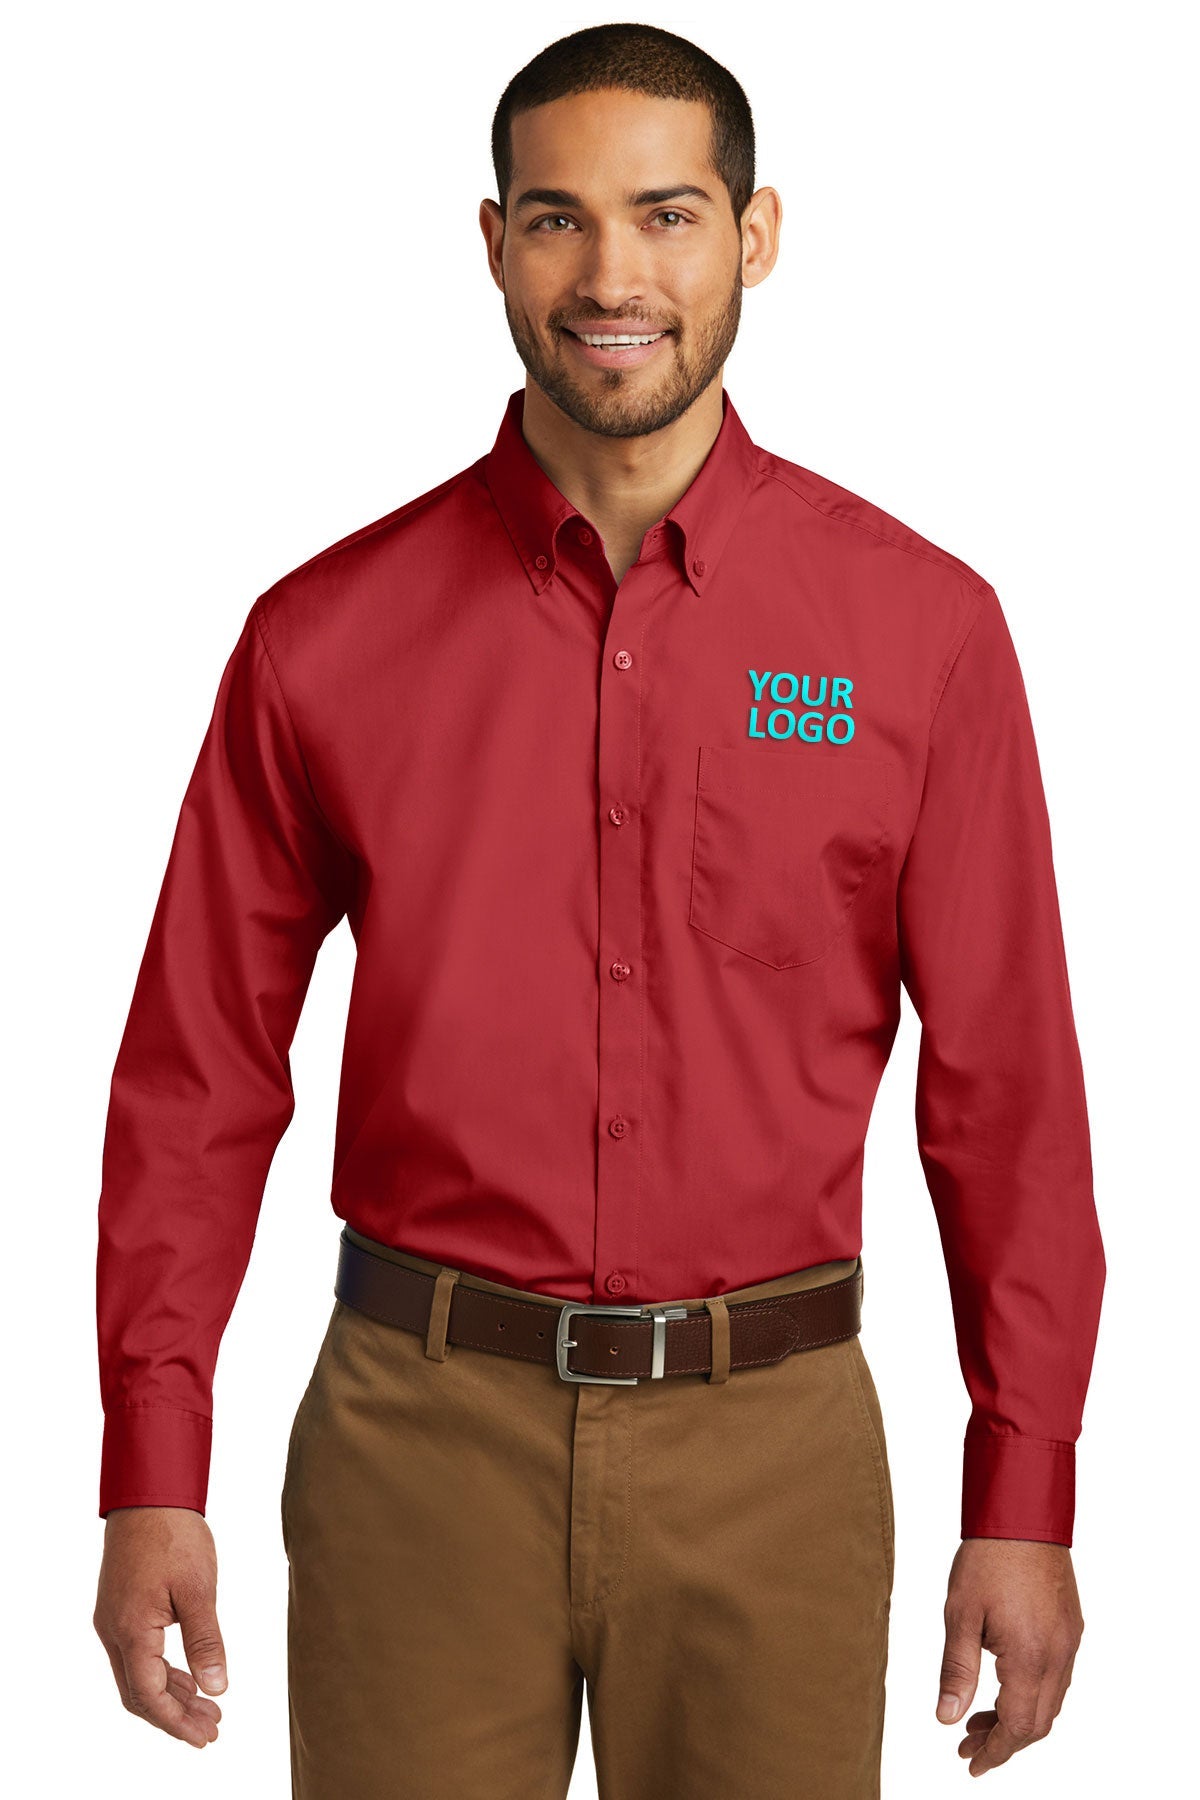 Port Authority Rich Red W100 logo shirts